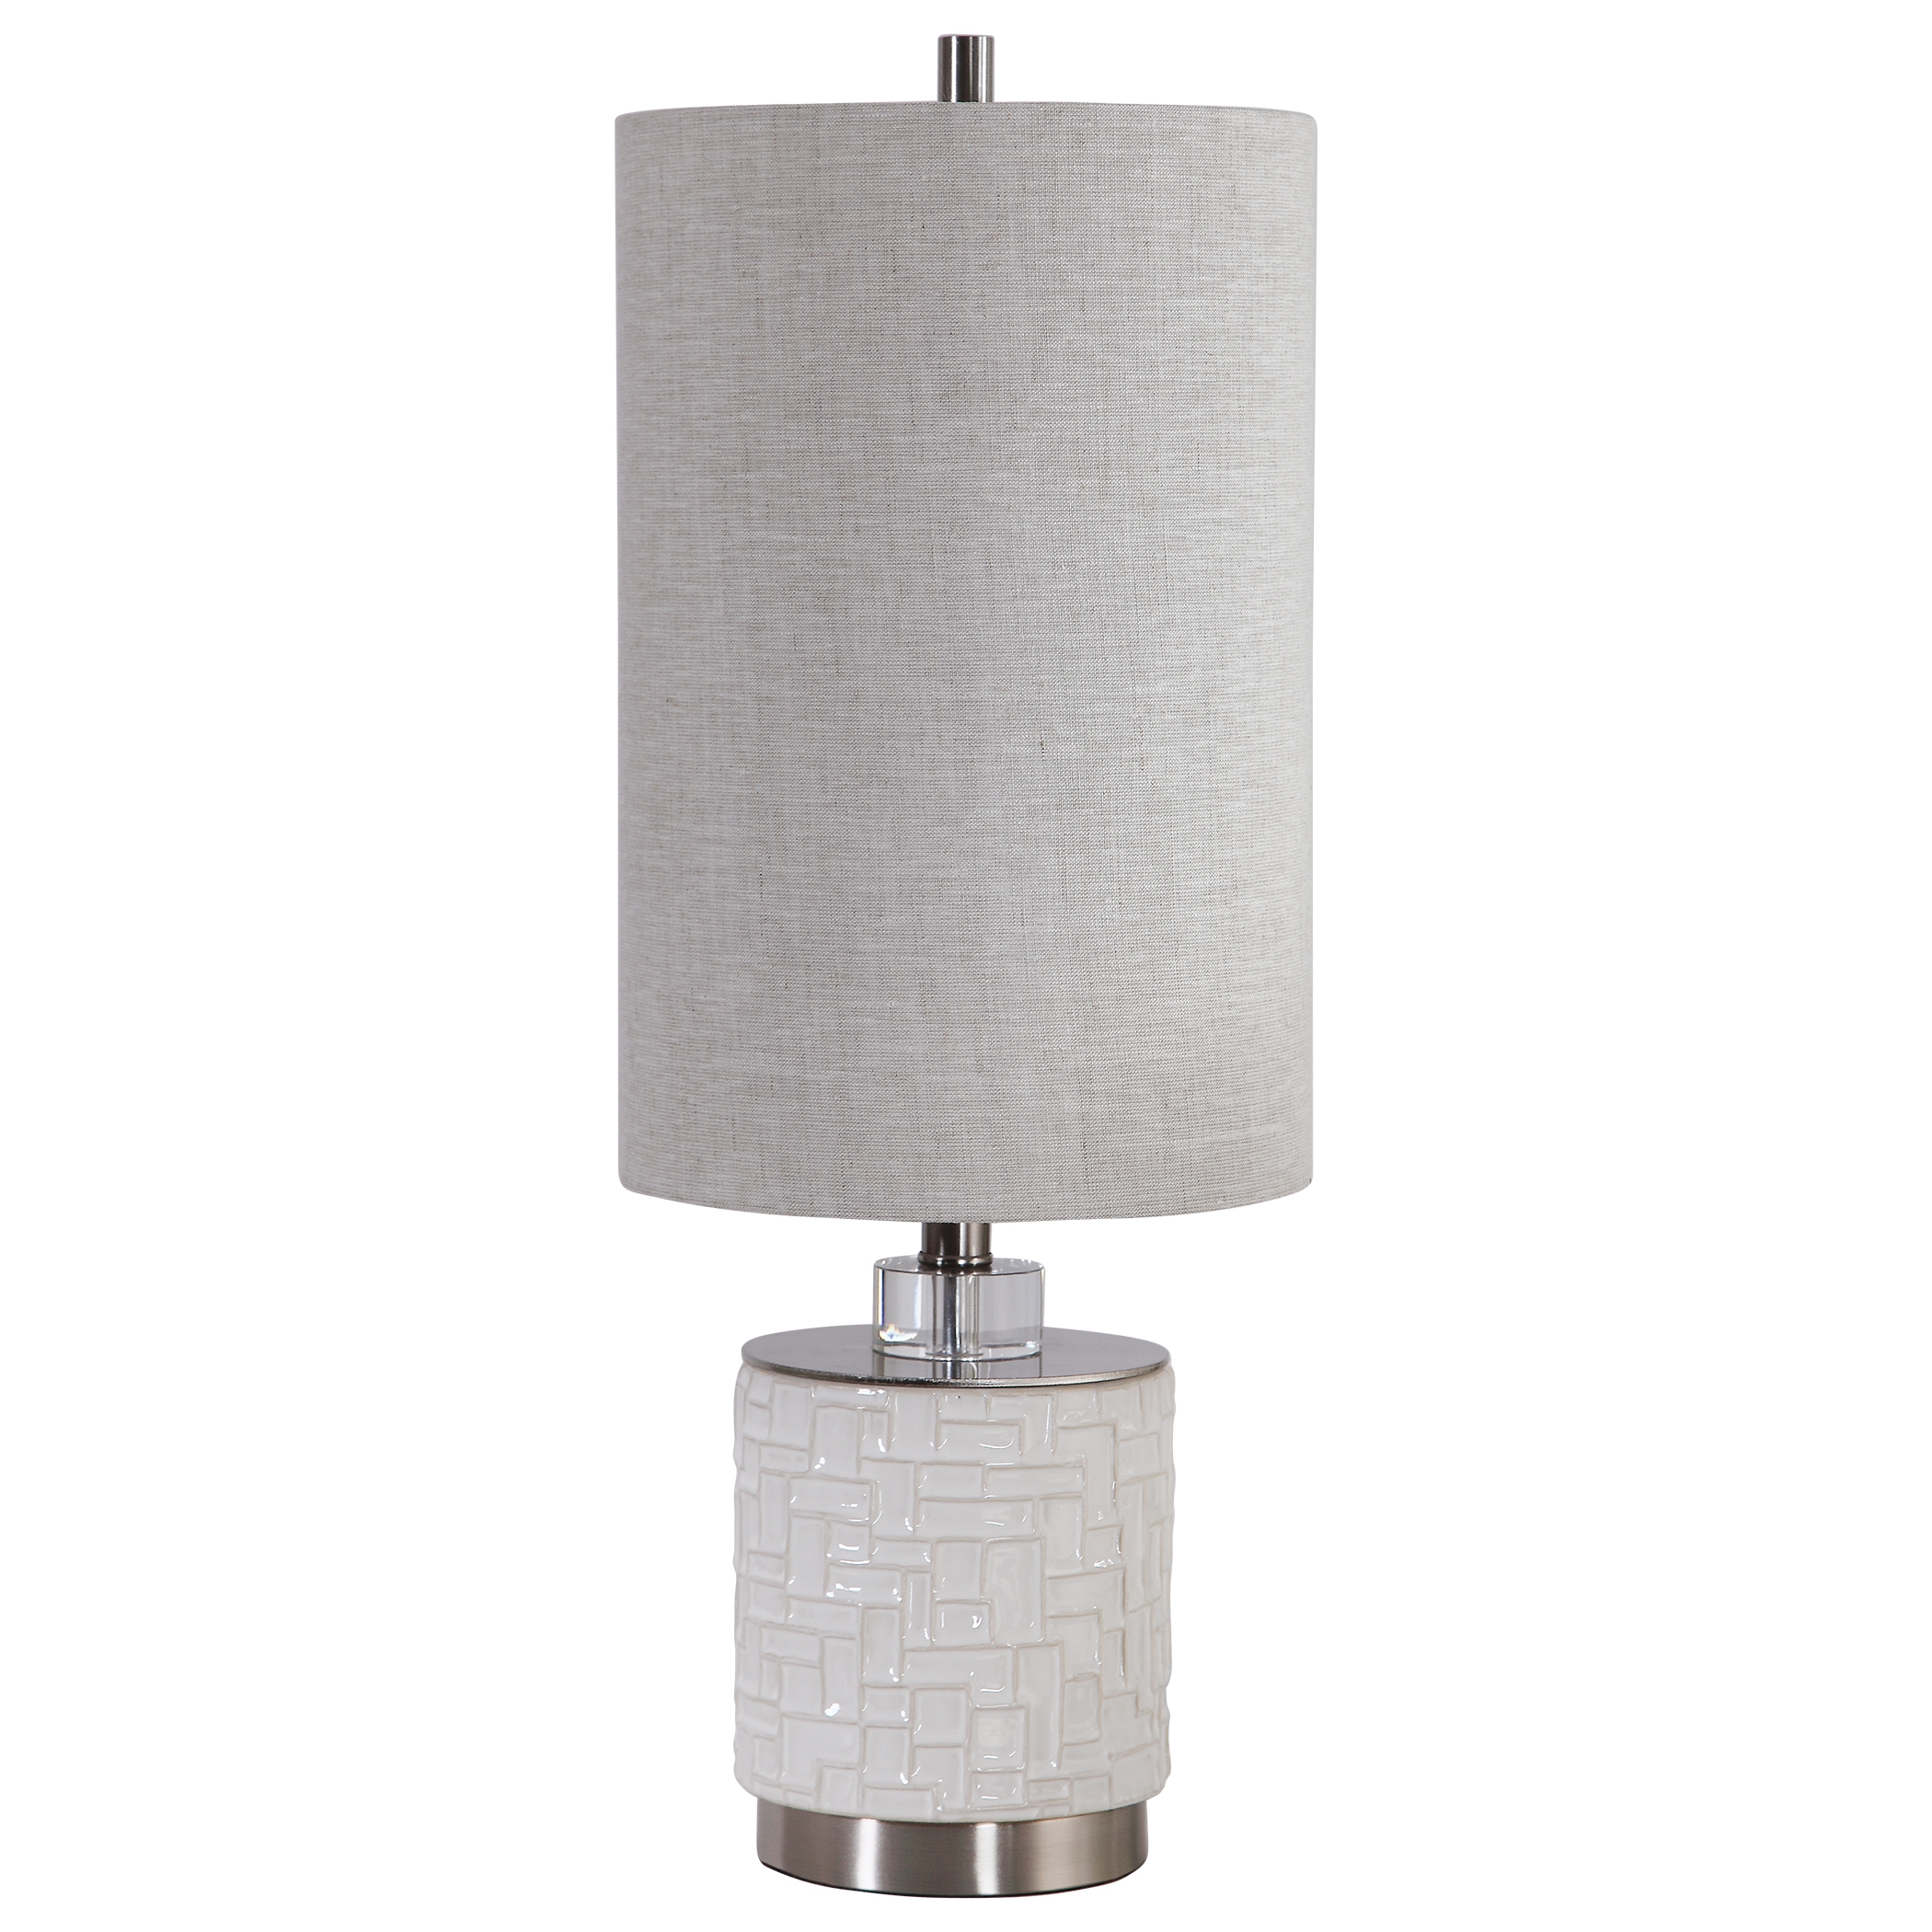 Elyn Glossy White Accent Lamp - Image 6